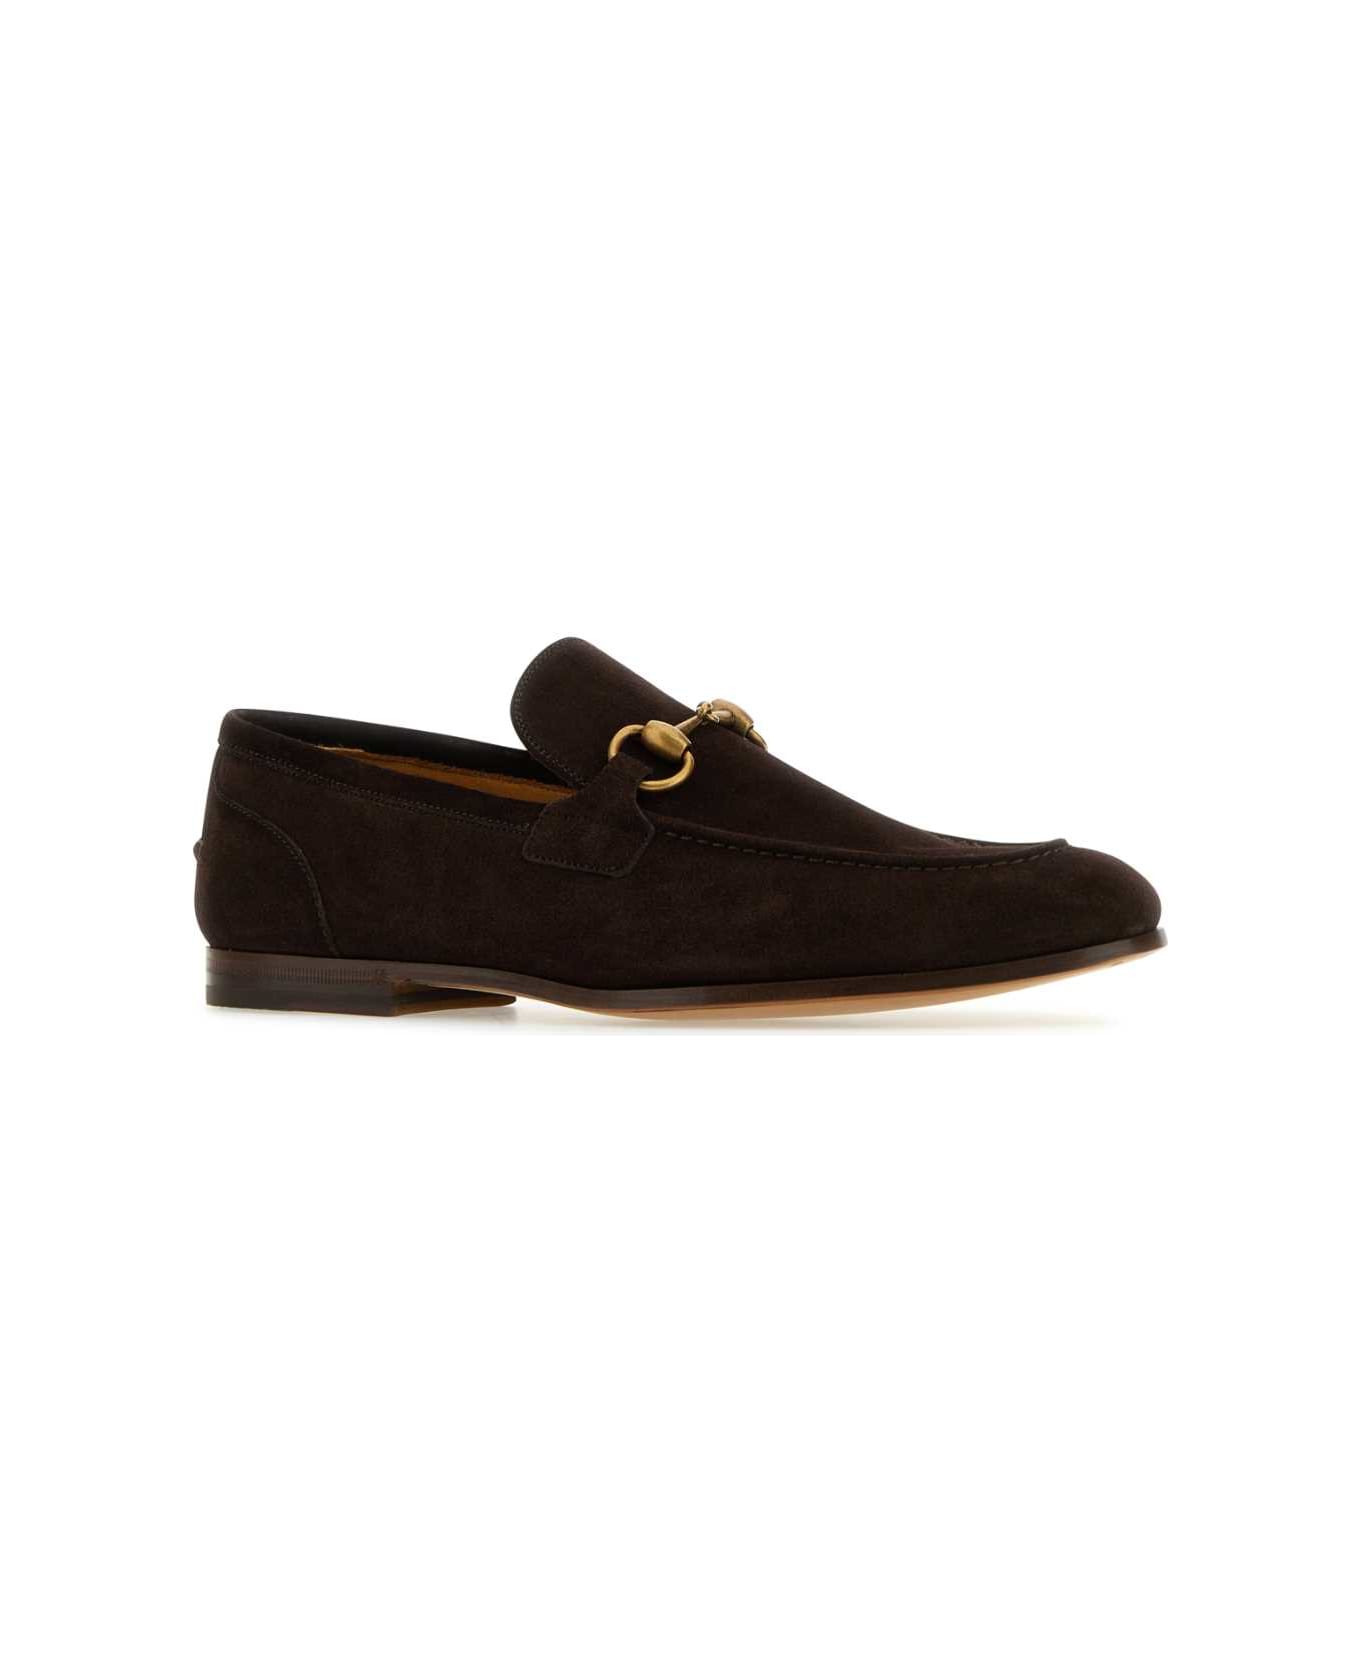 Gucci Chocolate Suede Loafers - COCOA